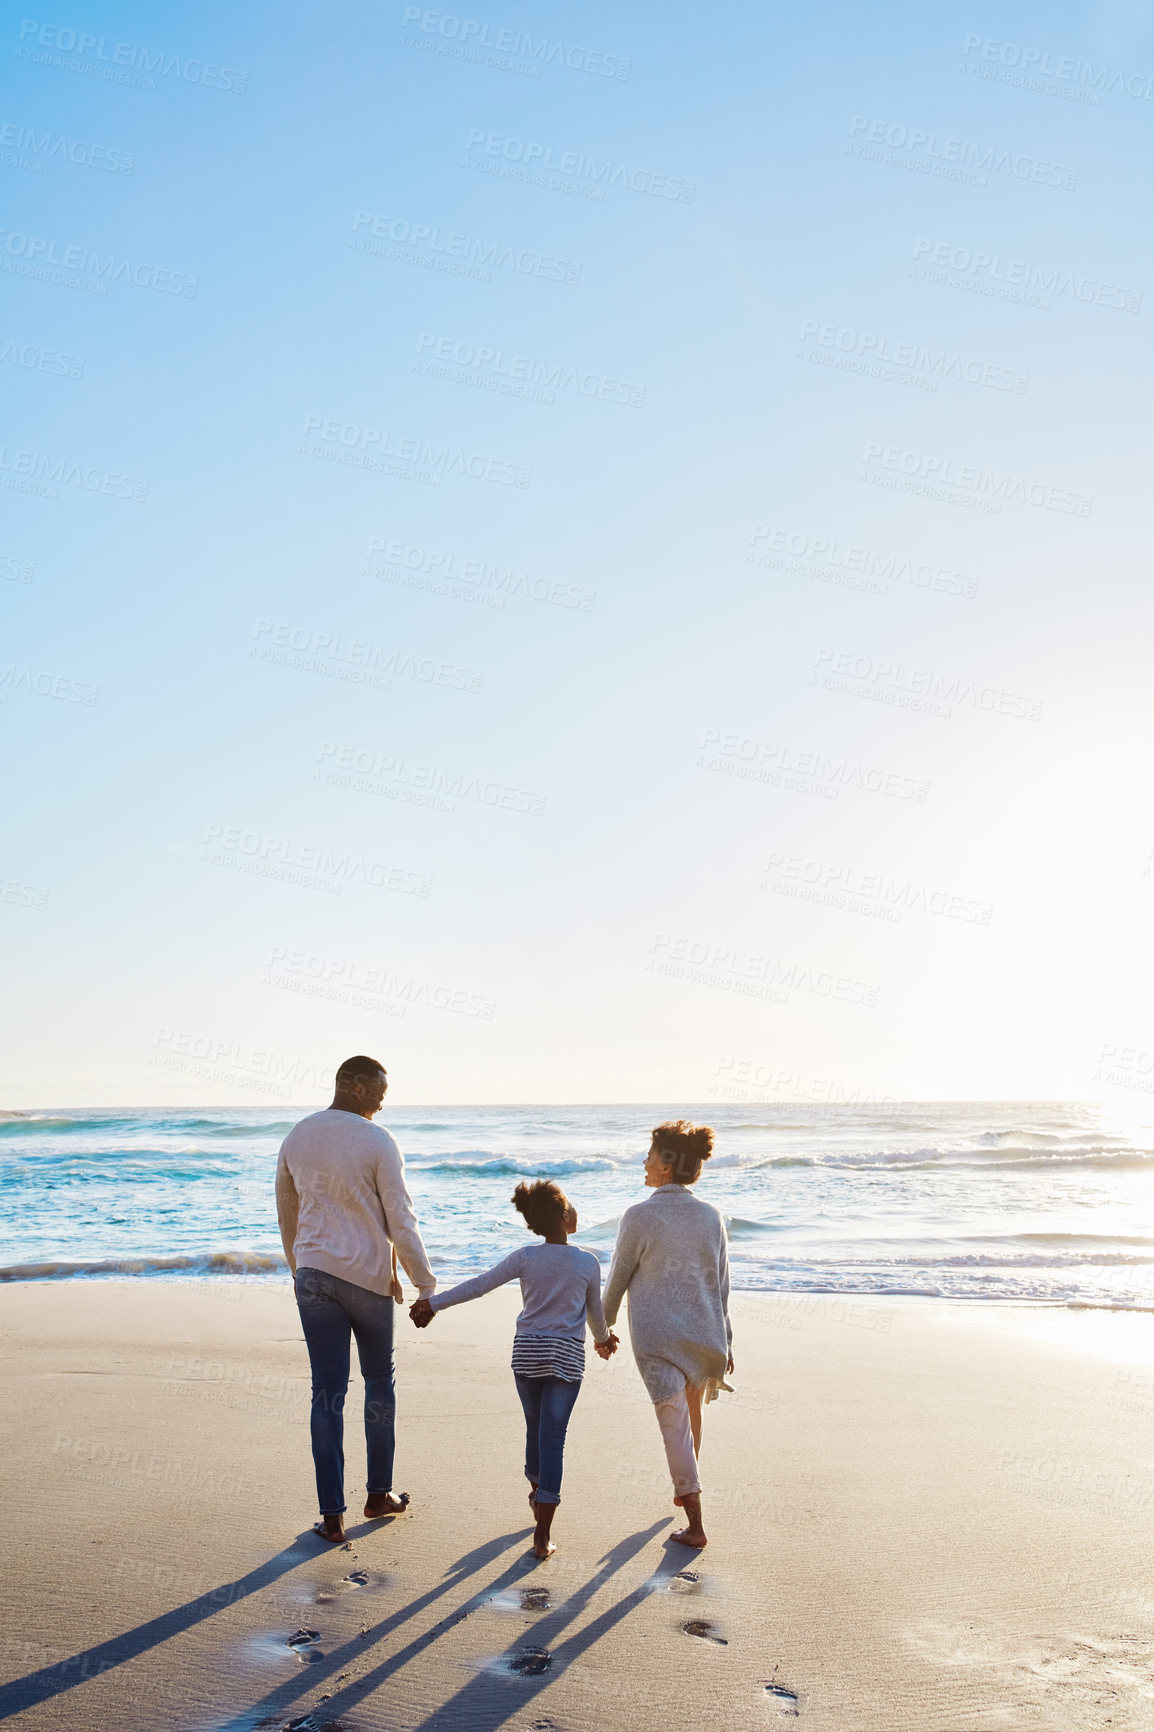 Buy stock photo Family, beach and walk during sunset on vacation or holiday relaxing and enjoying peaceful scenery at the ocean. Sea, water and parents with daughter, child or kid with childhood freedom